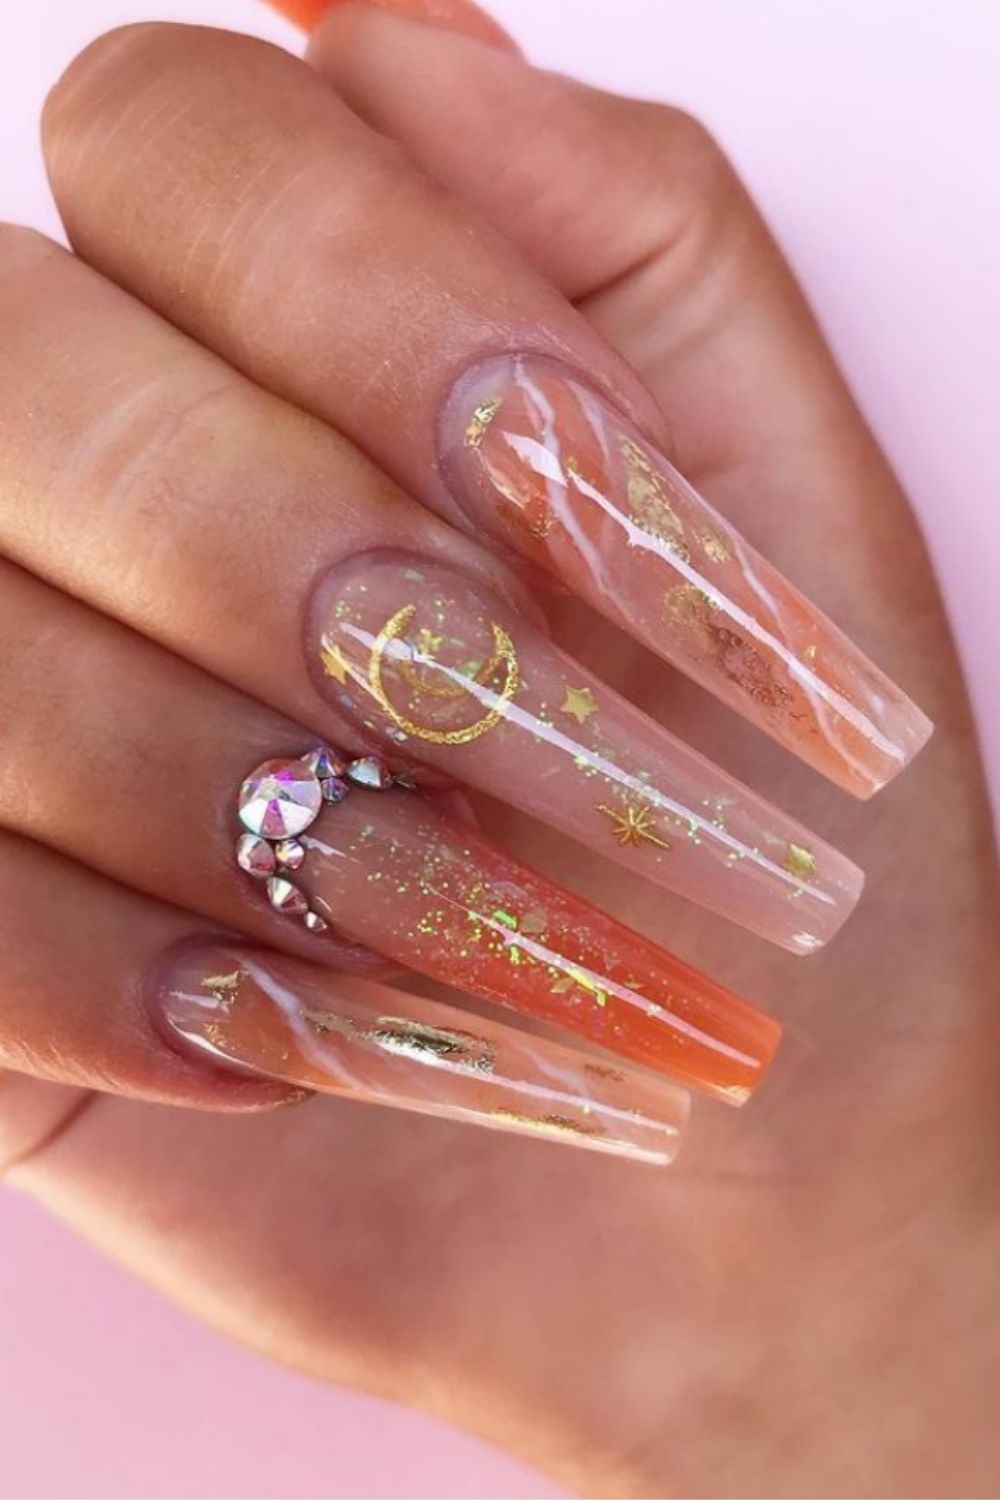 35+ Amazing Glitter Acrylic Nails You Want To Try In 2021!